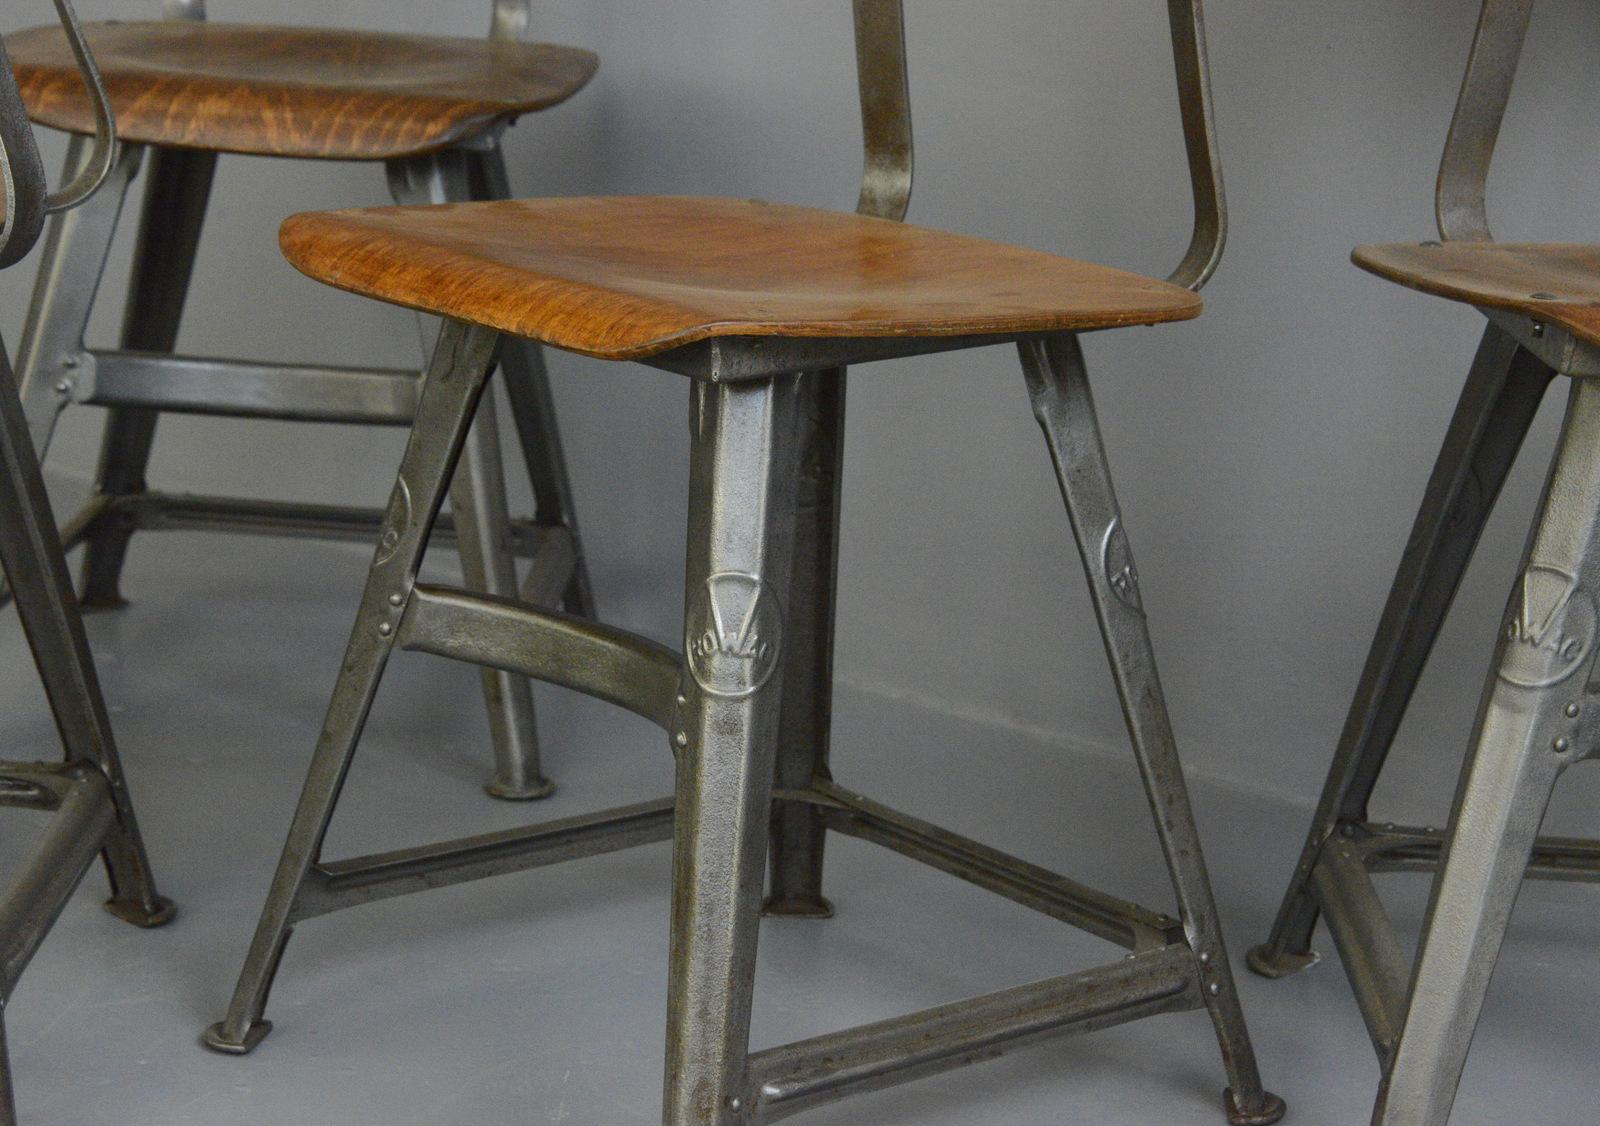 German Industrial Factory Chairs by Rowac, circa 1920s